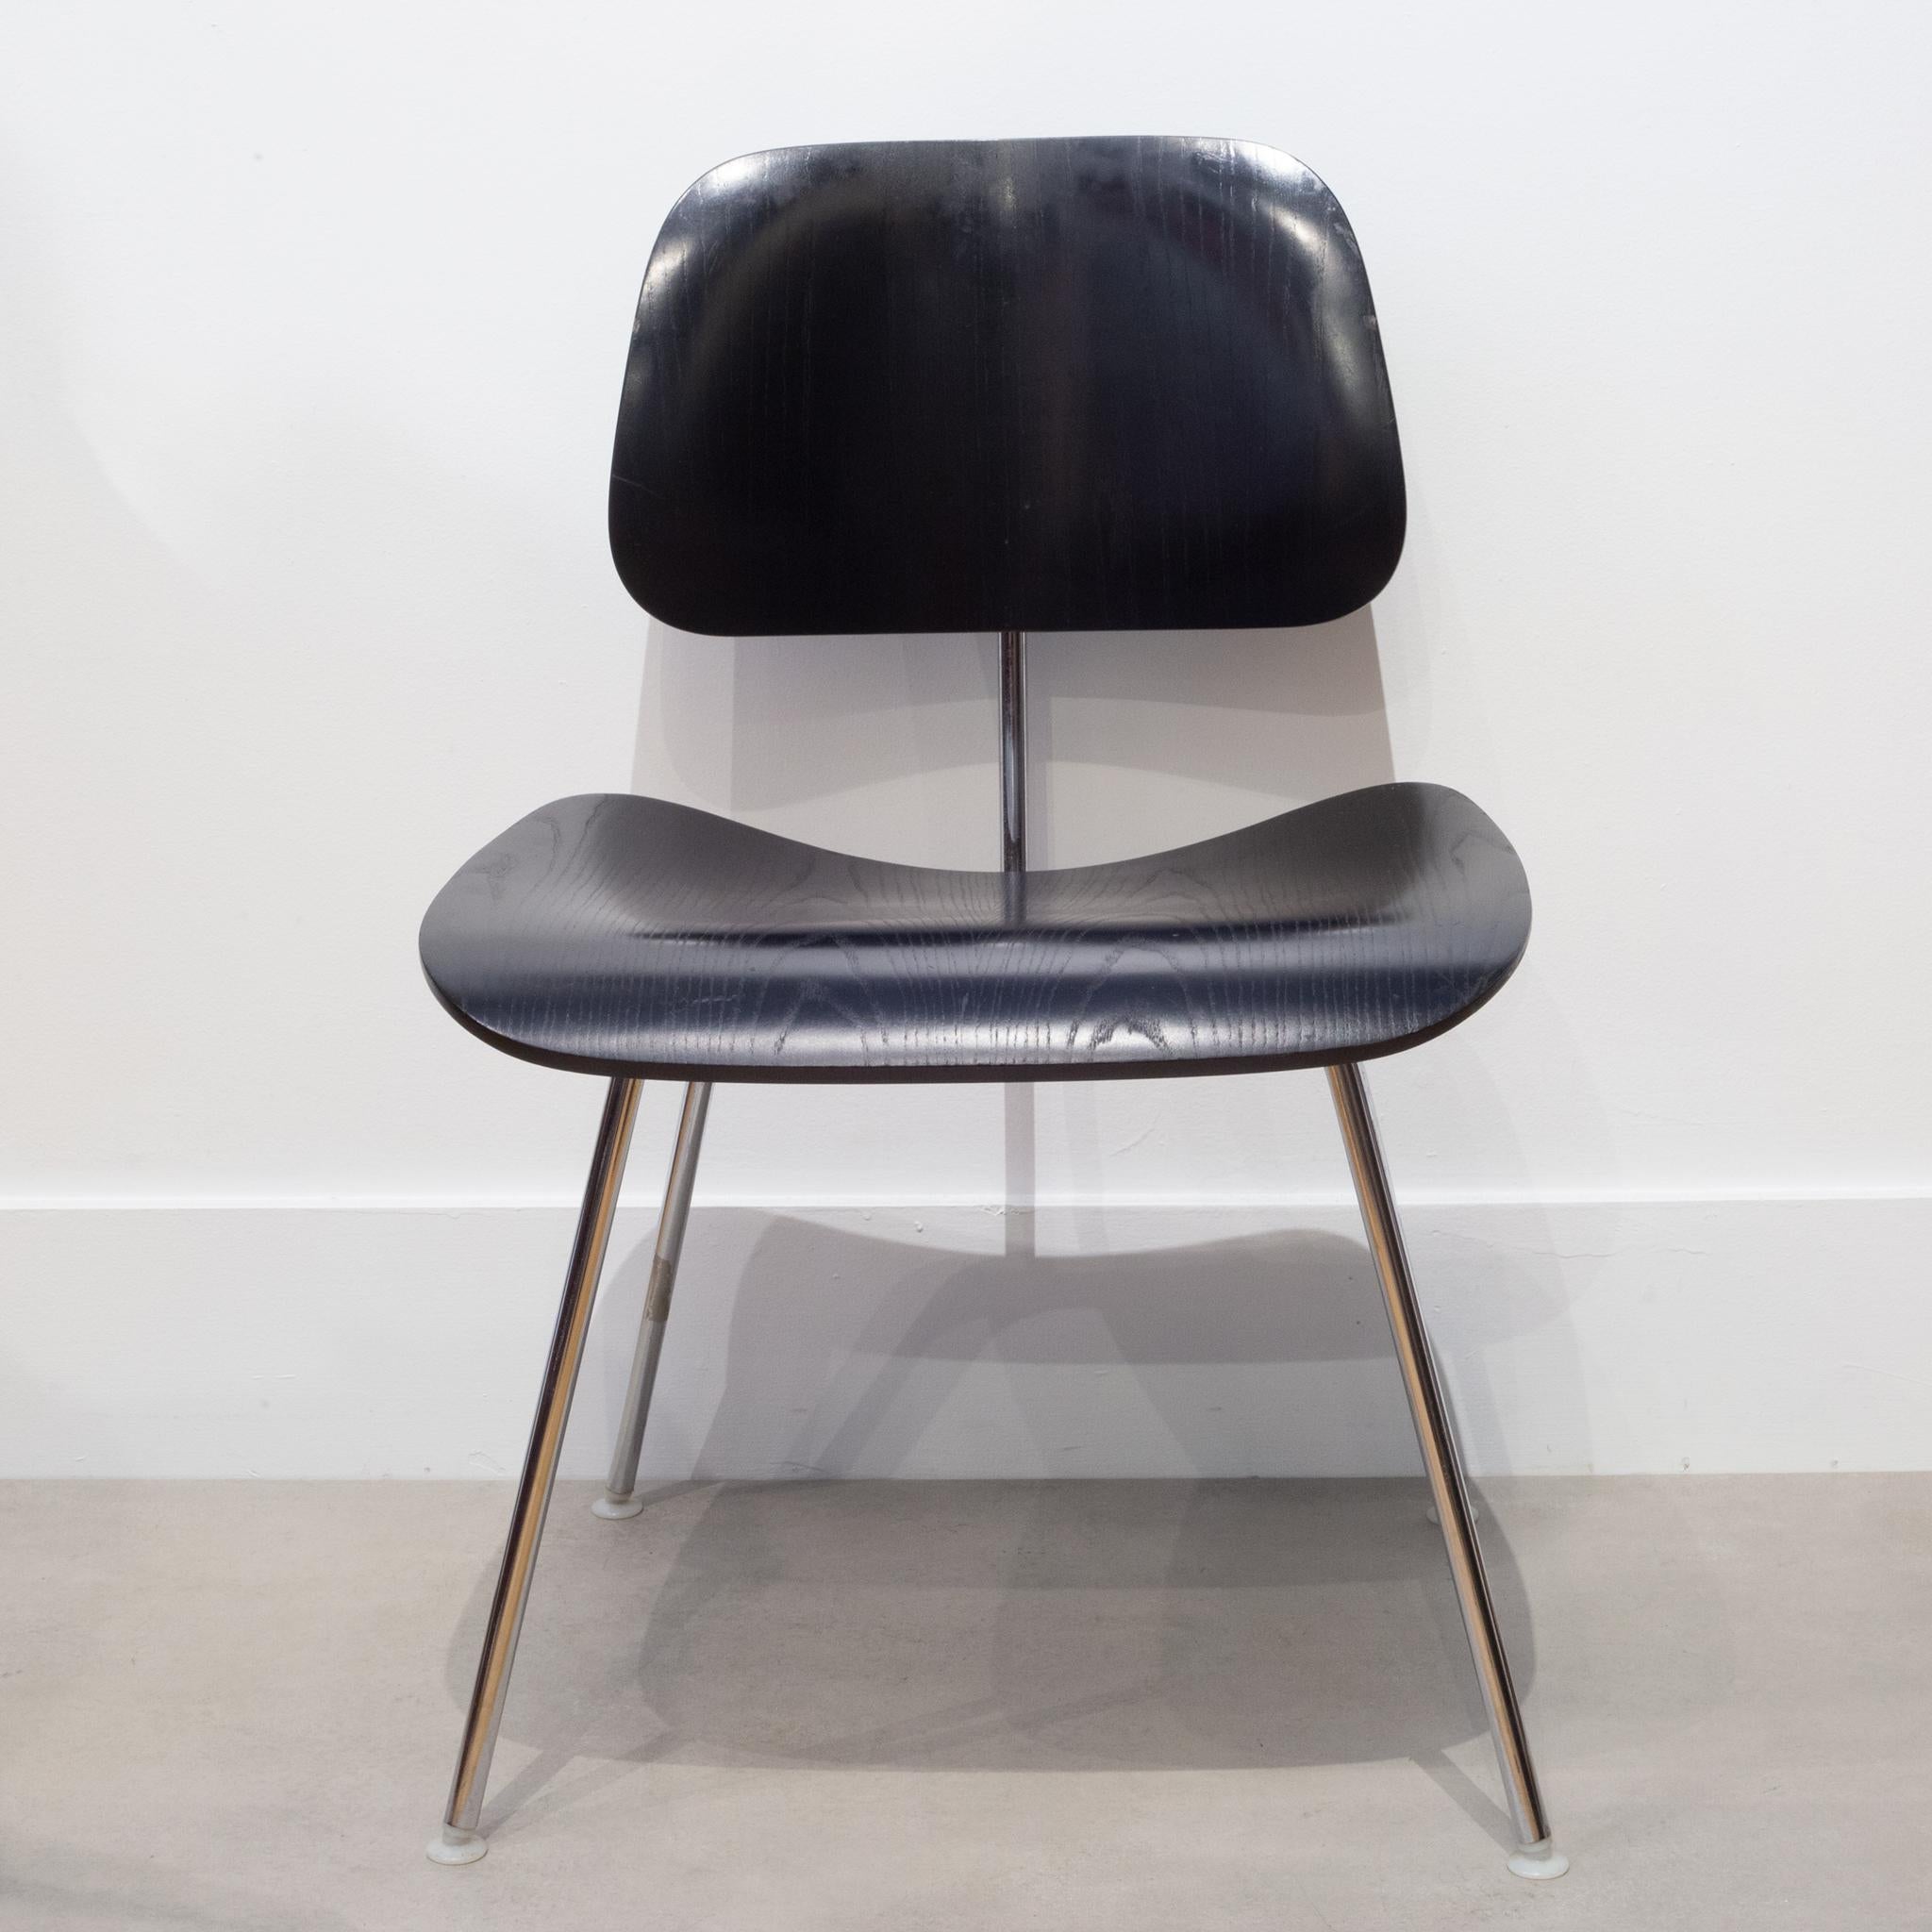 Eames for Herman Miller DCM Chairs in Black-Price is Per Chair 8